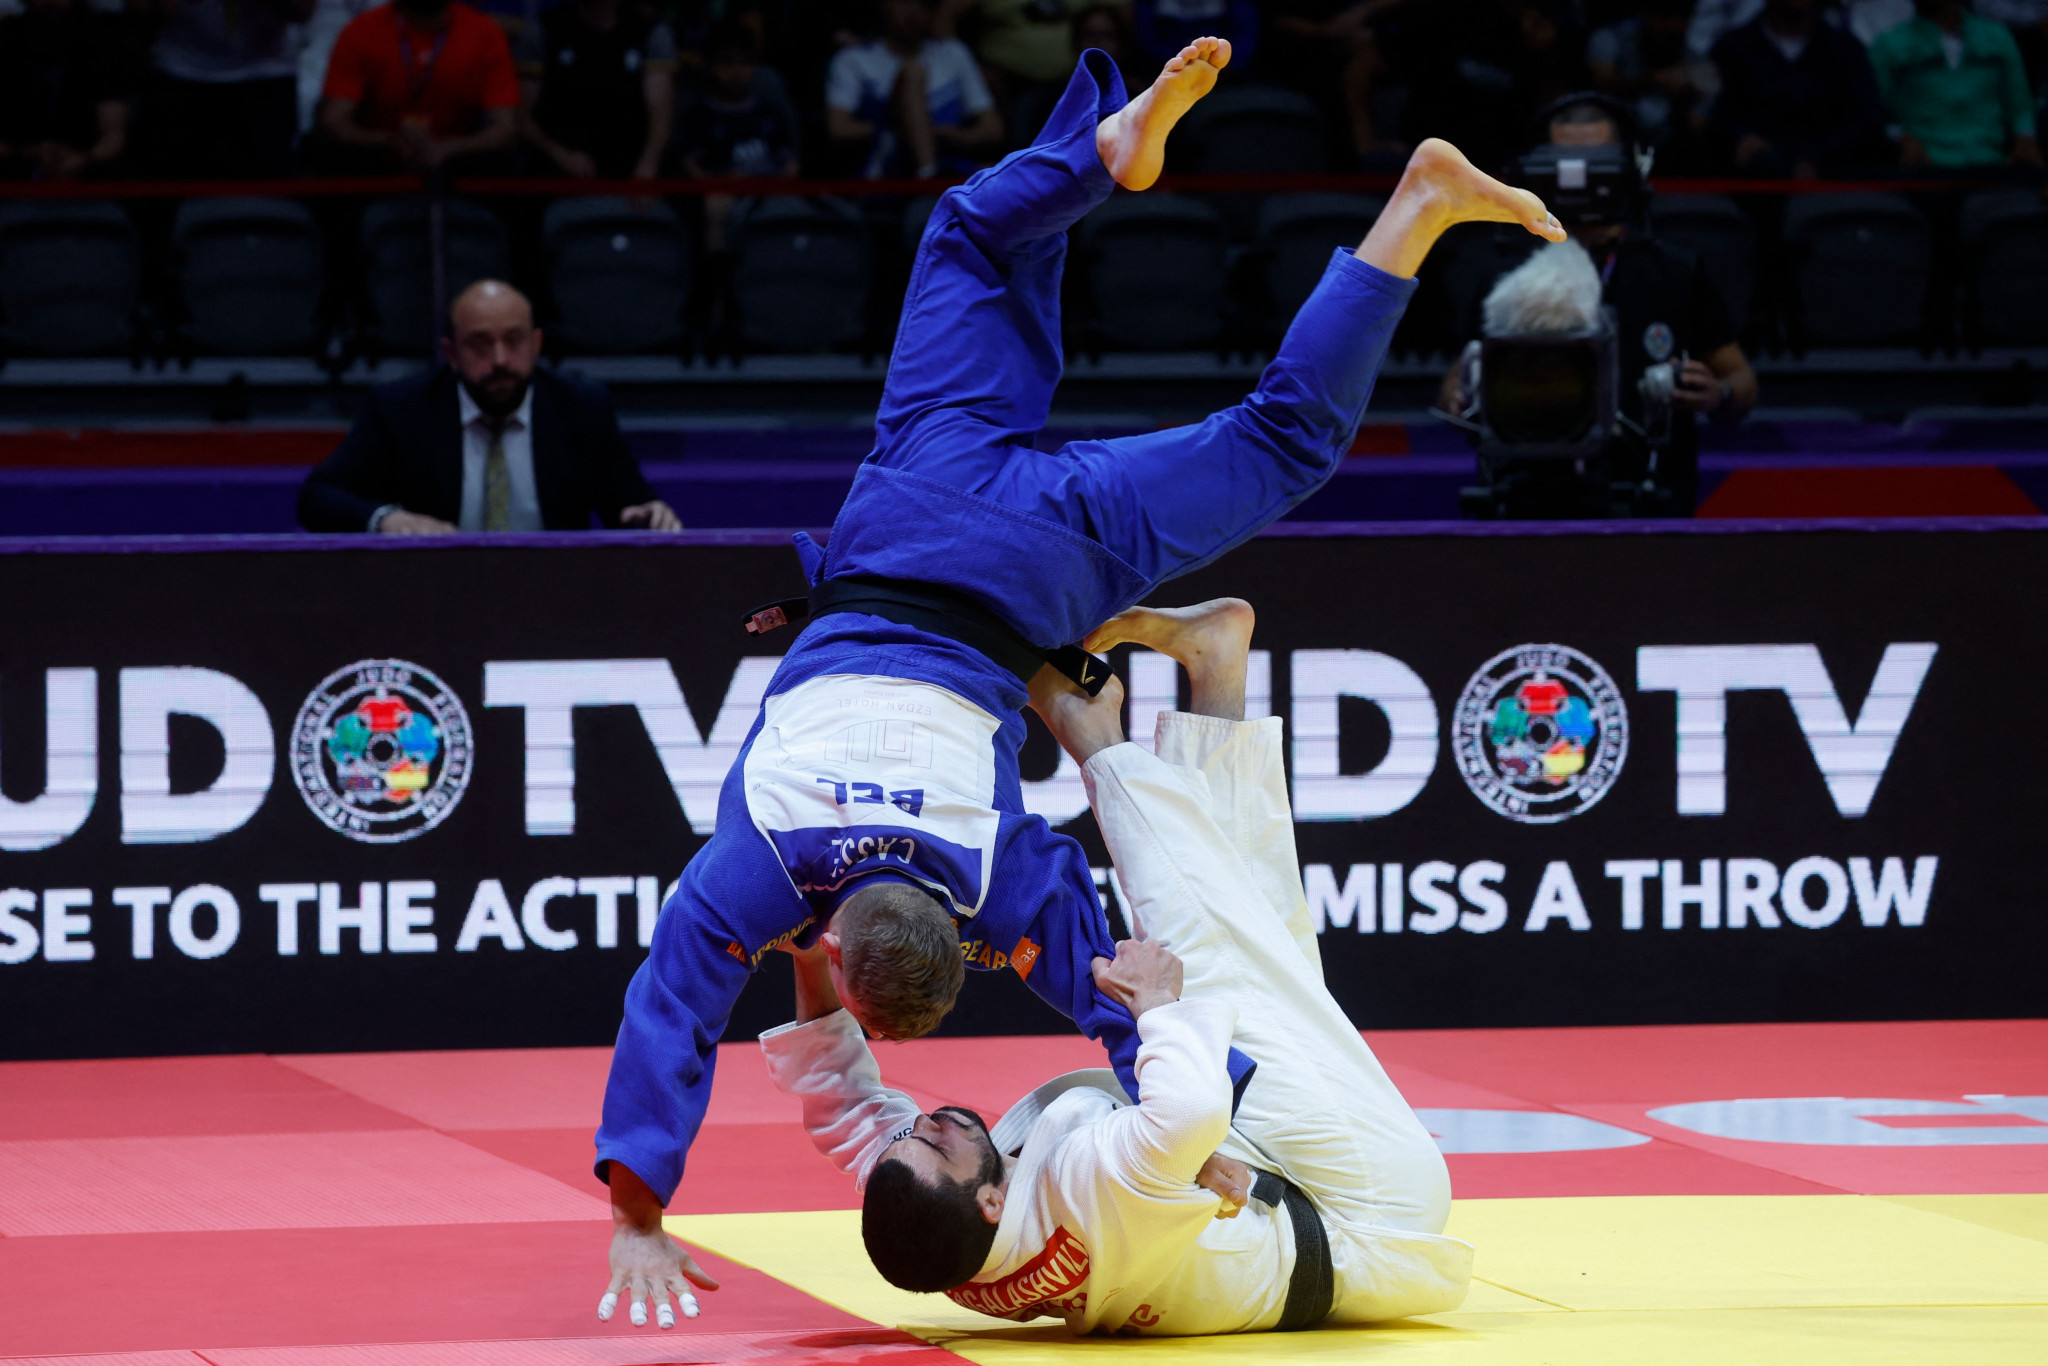 Matthias Casse of Belgium is sent flying during his defeat to Georgia's Tato Grigalashvili in the men's under-81kg final ©Getty Images